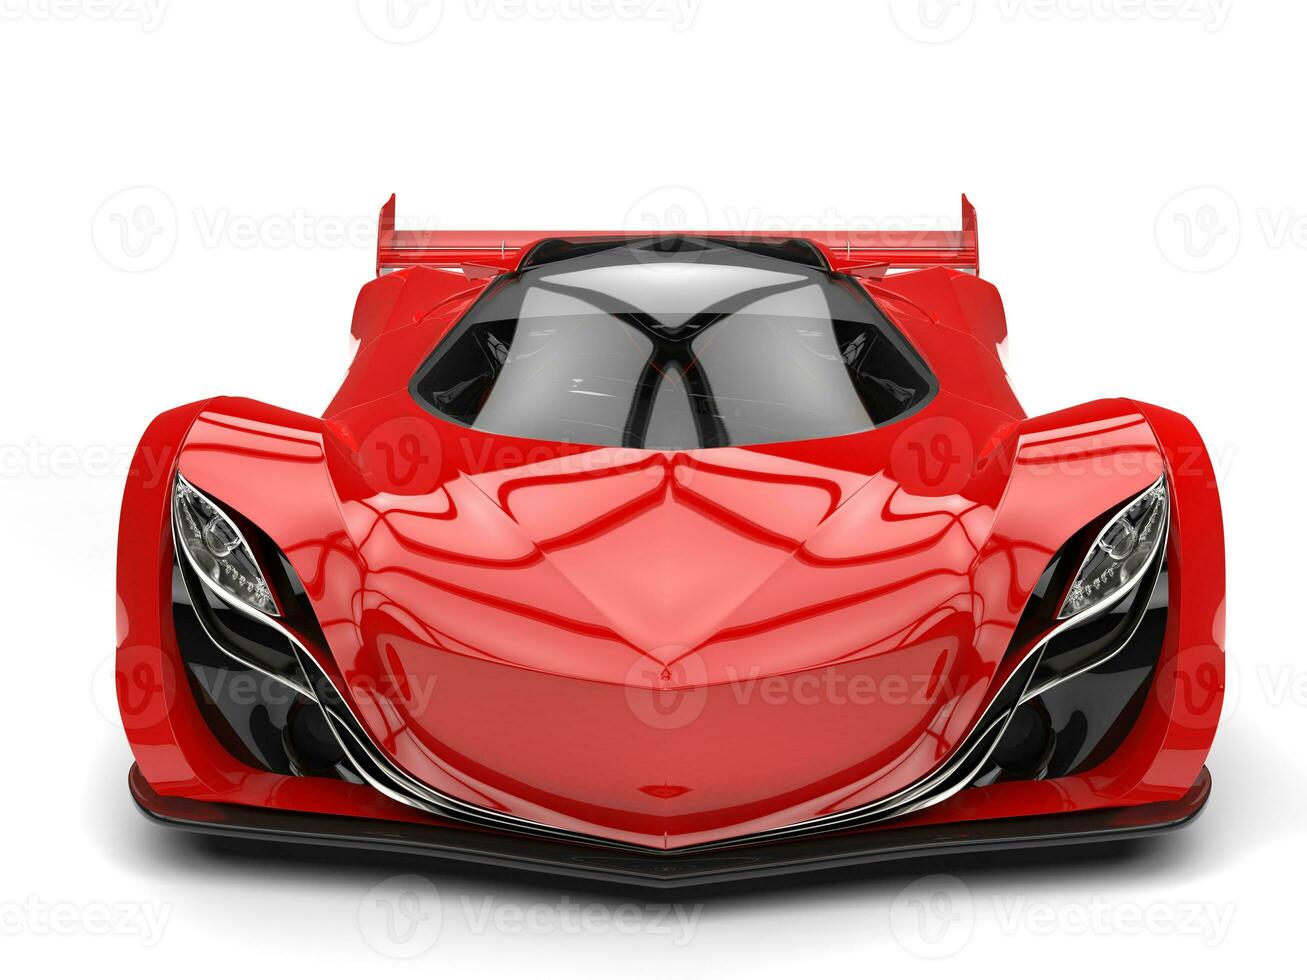 Scarlet red awesome race super car - front view closeup shot photo